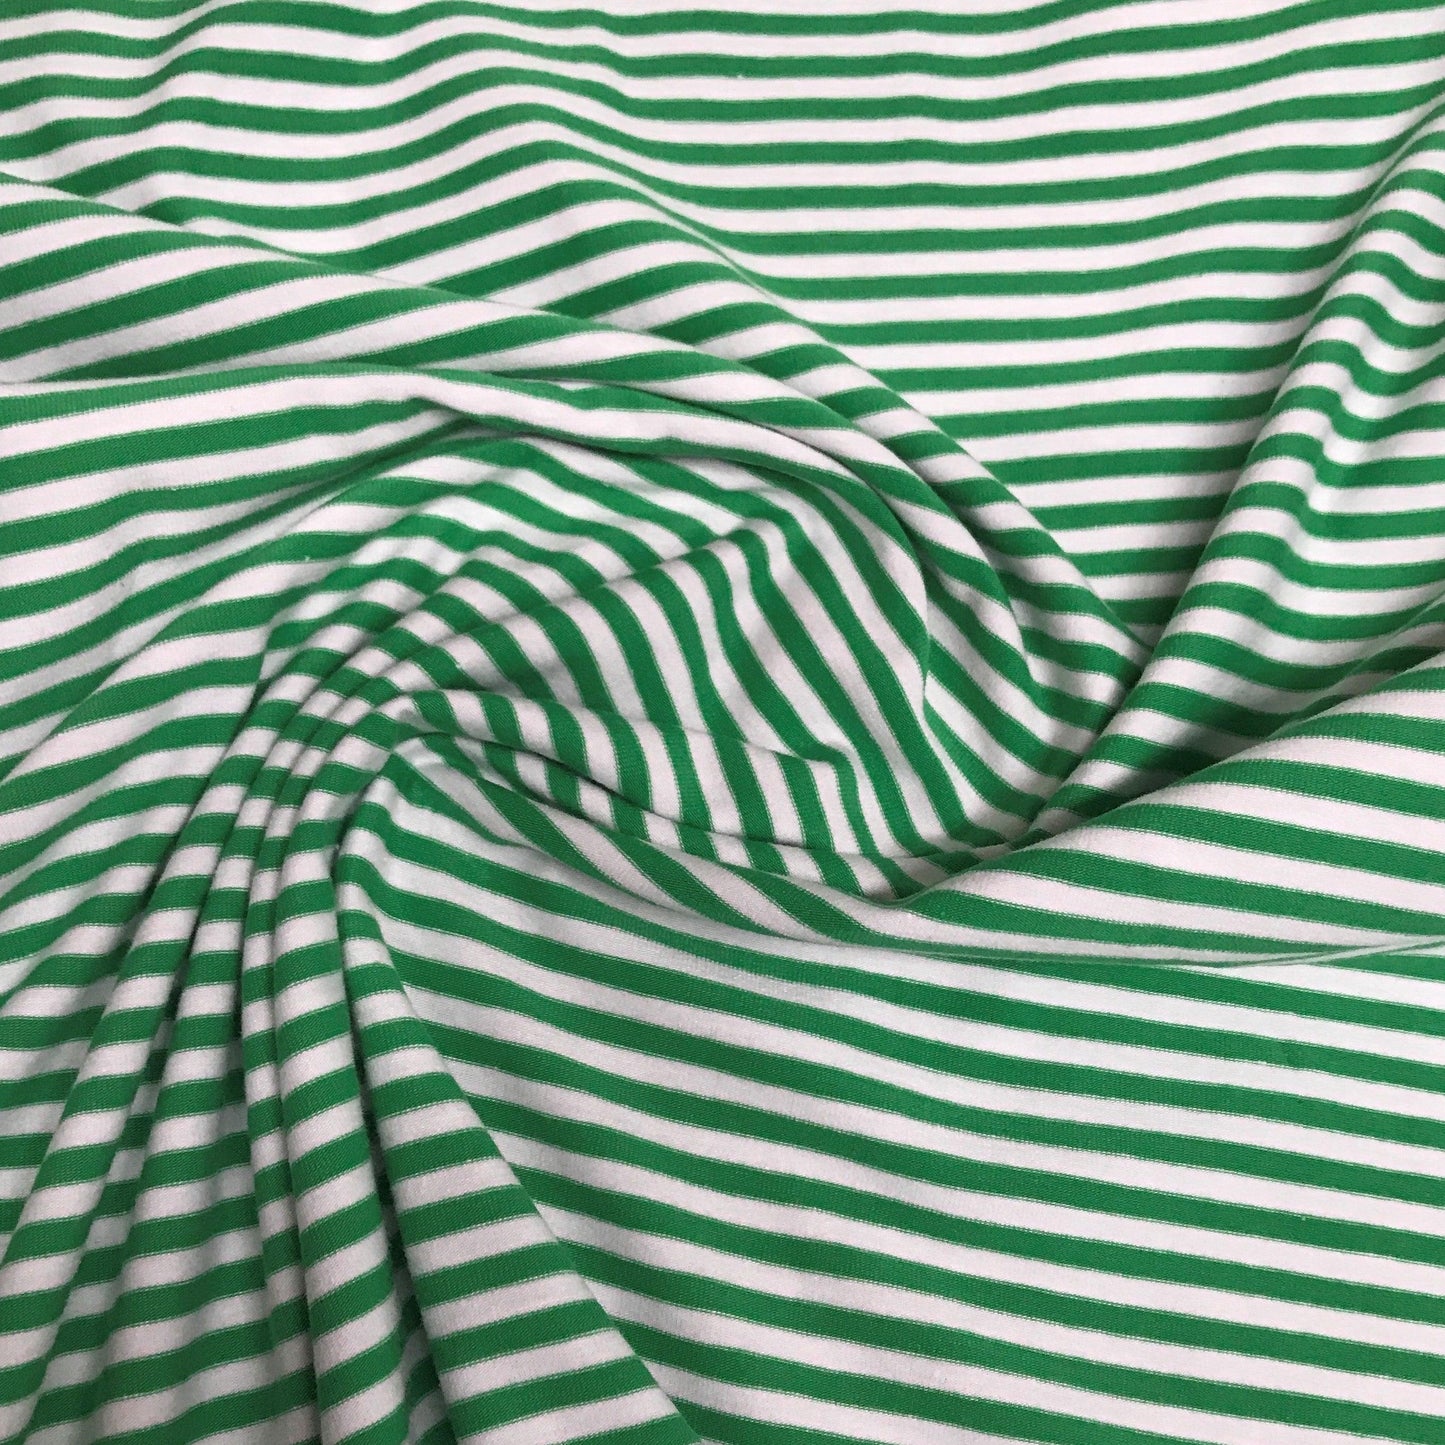 Green and White 1/8" Stripes on Cotton/Spandex Jersey